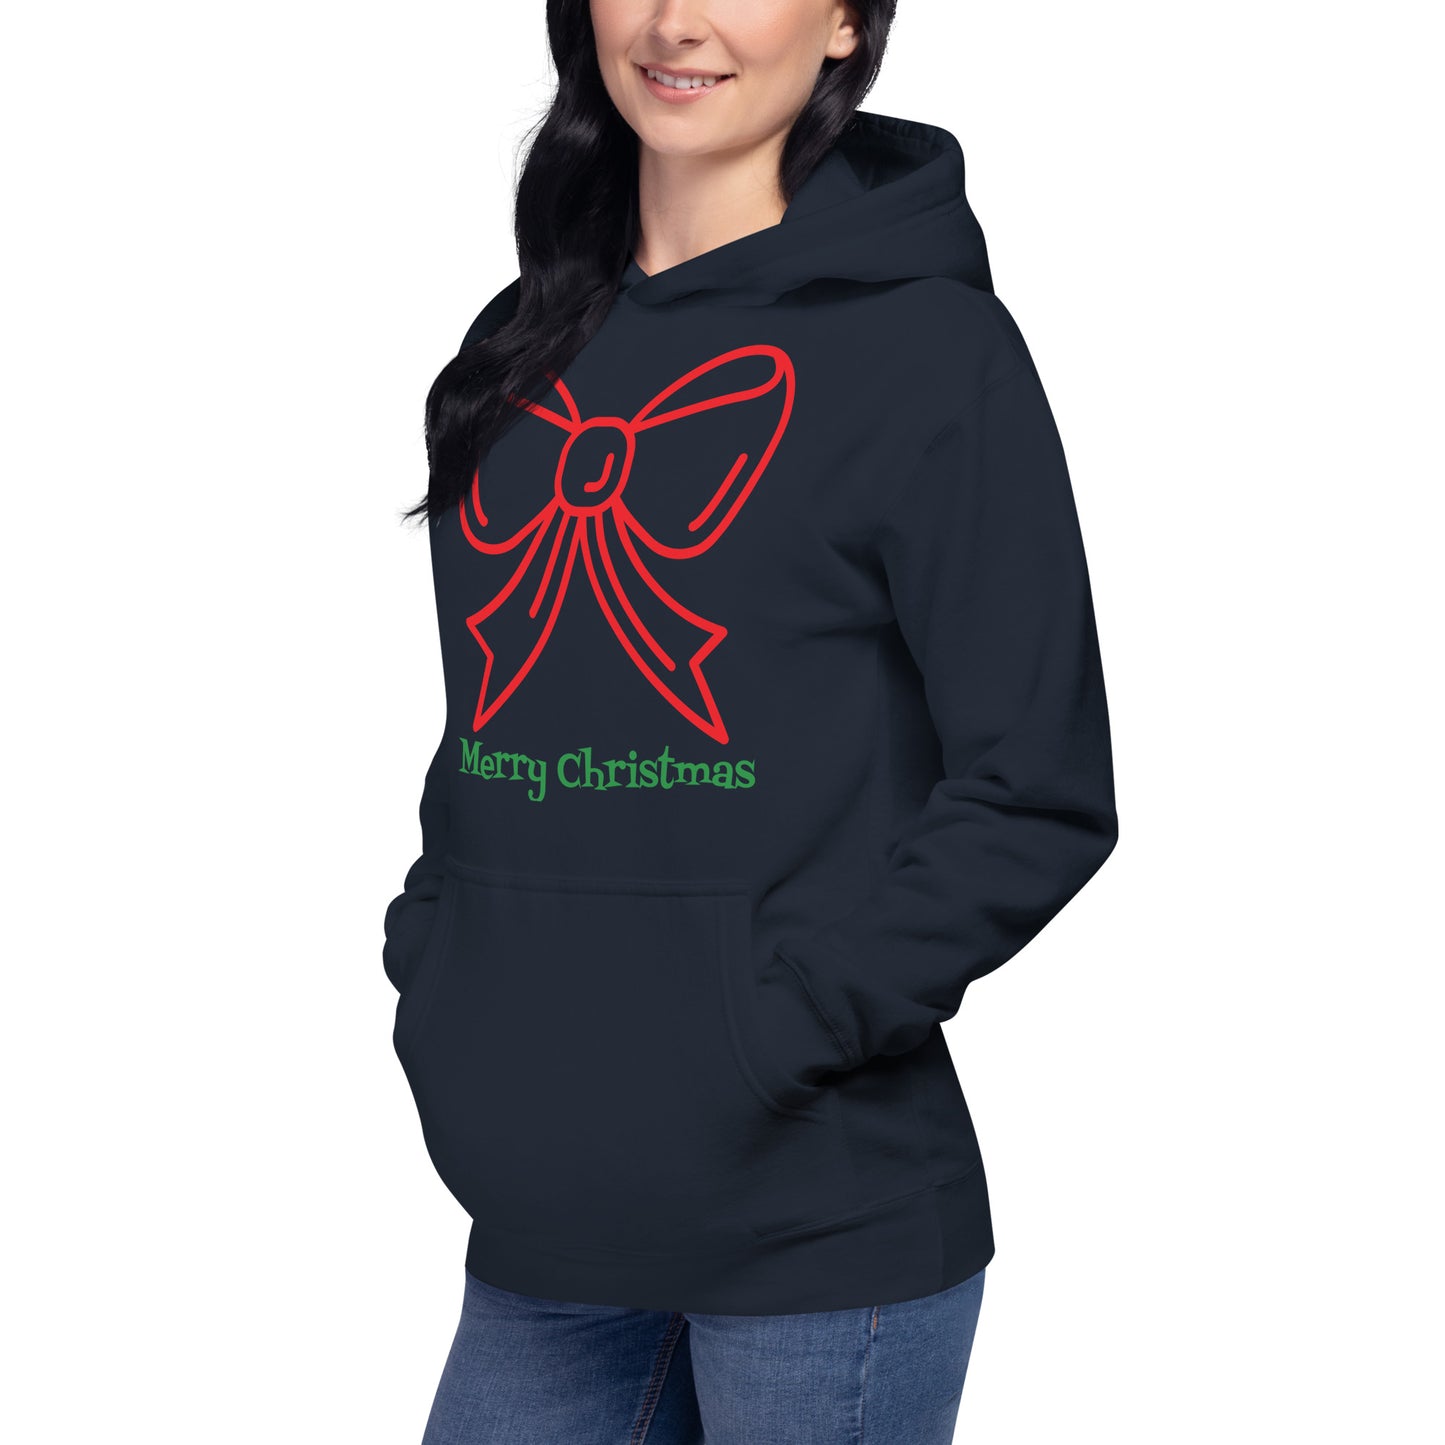 Merry Christmas Red Bow Unisex Hoodie, Christmas Gifts, Christmas Sweater, Christmas Hoodie, Christmas clothes